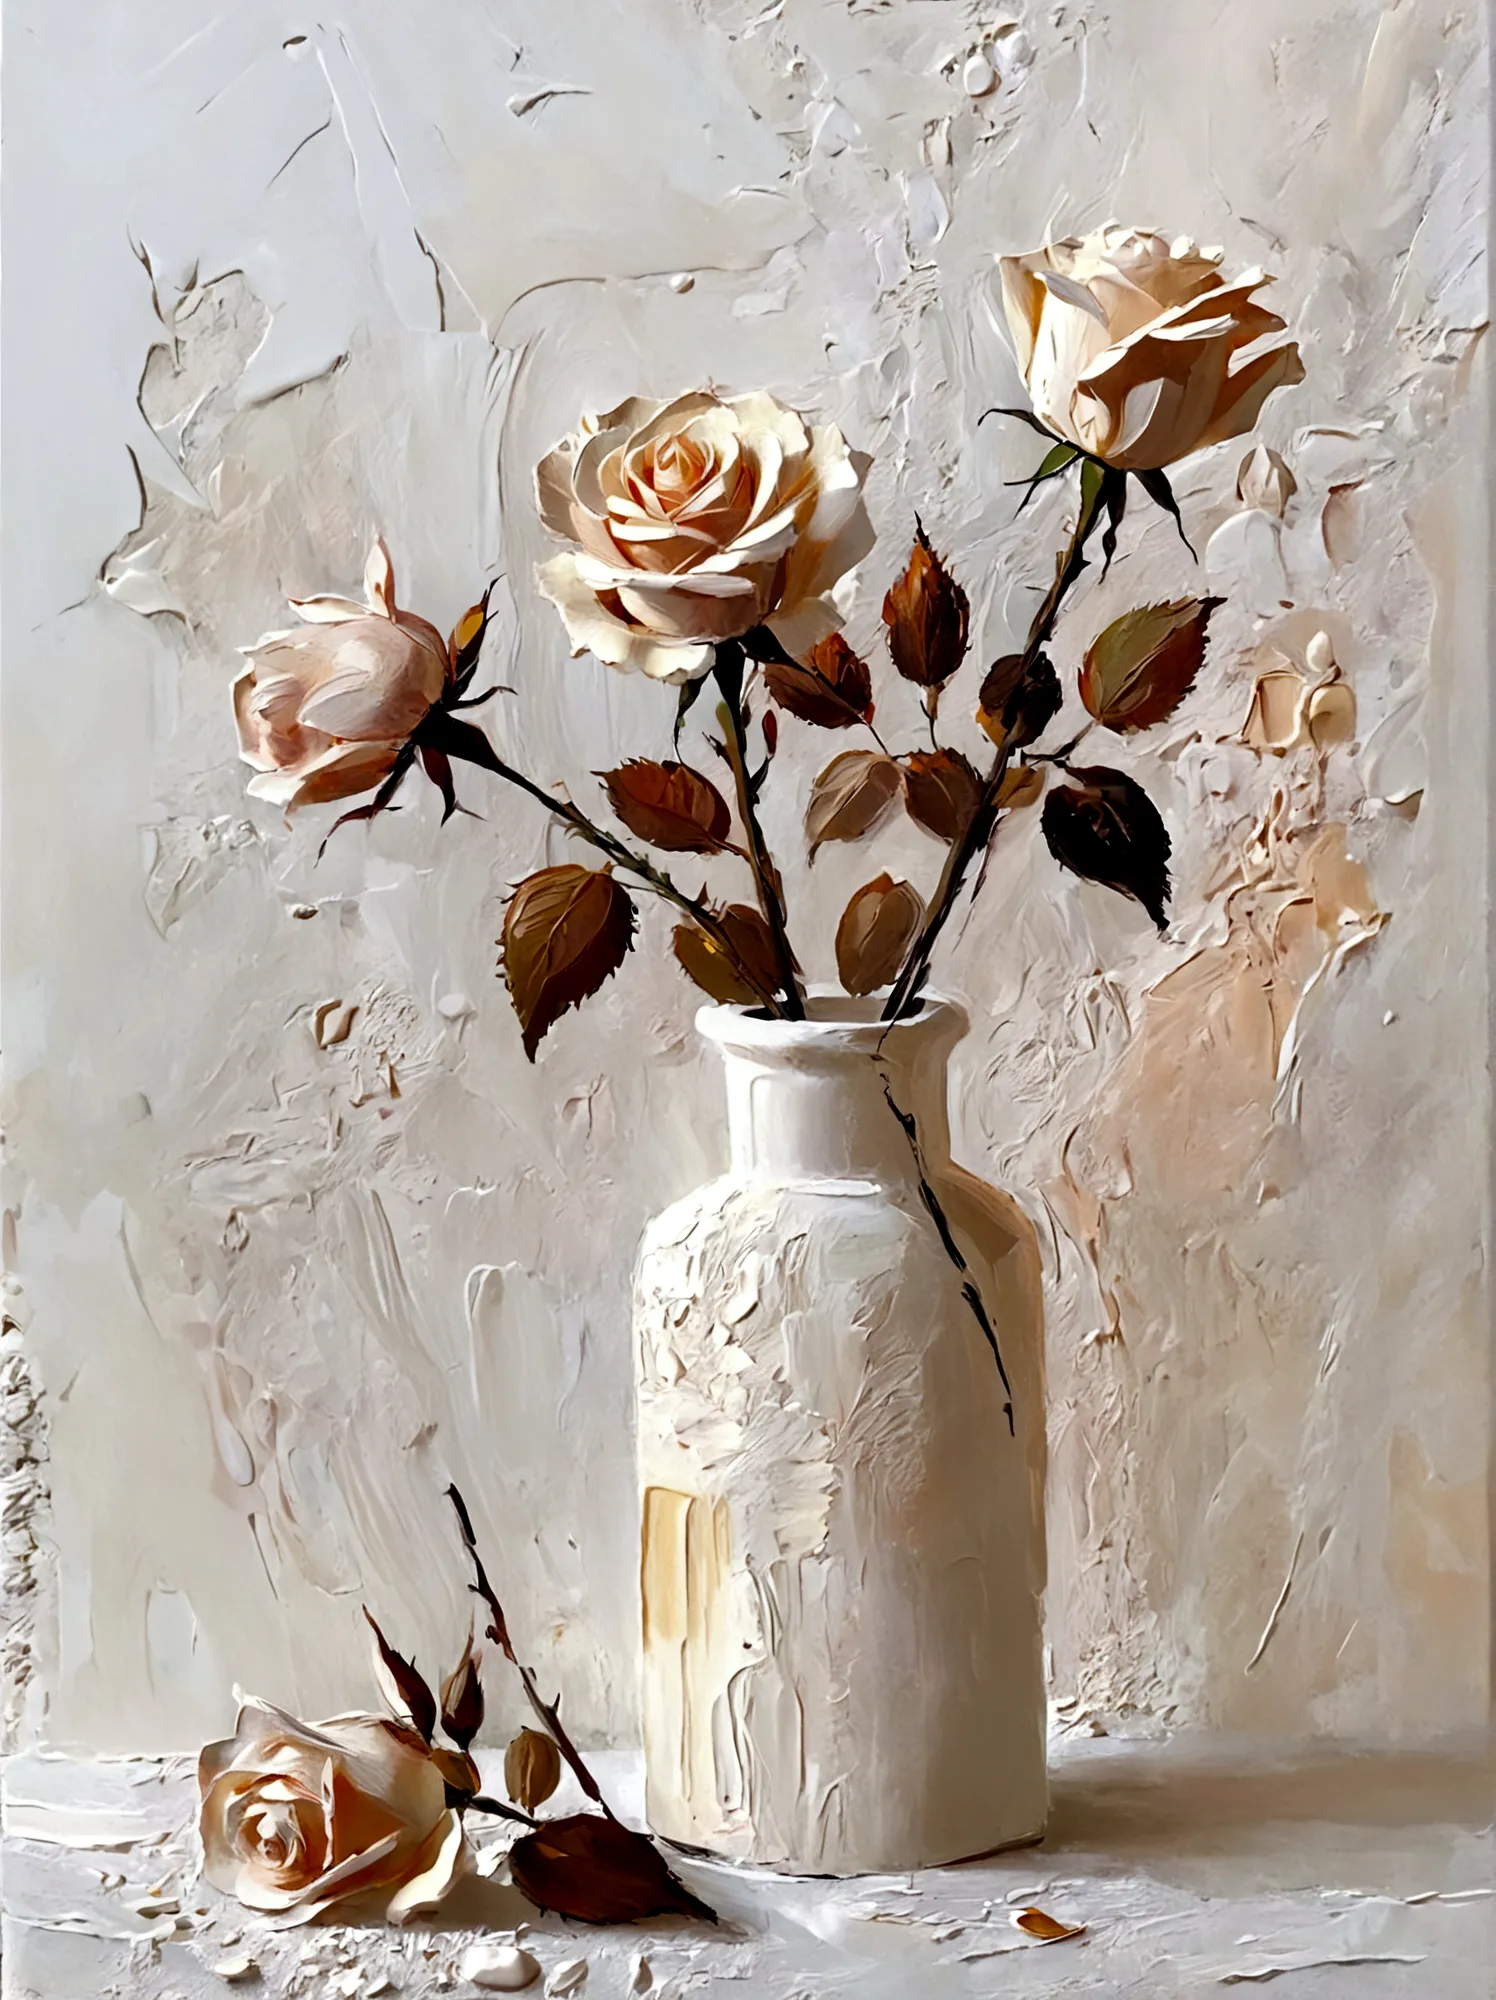 vase，Rose，Small flowers，Flowers，White background，vanilla，cream，whiskey，Abstract Art，emotion，emotion，Thick textured paint, 